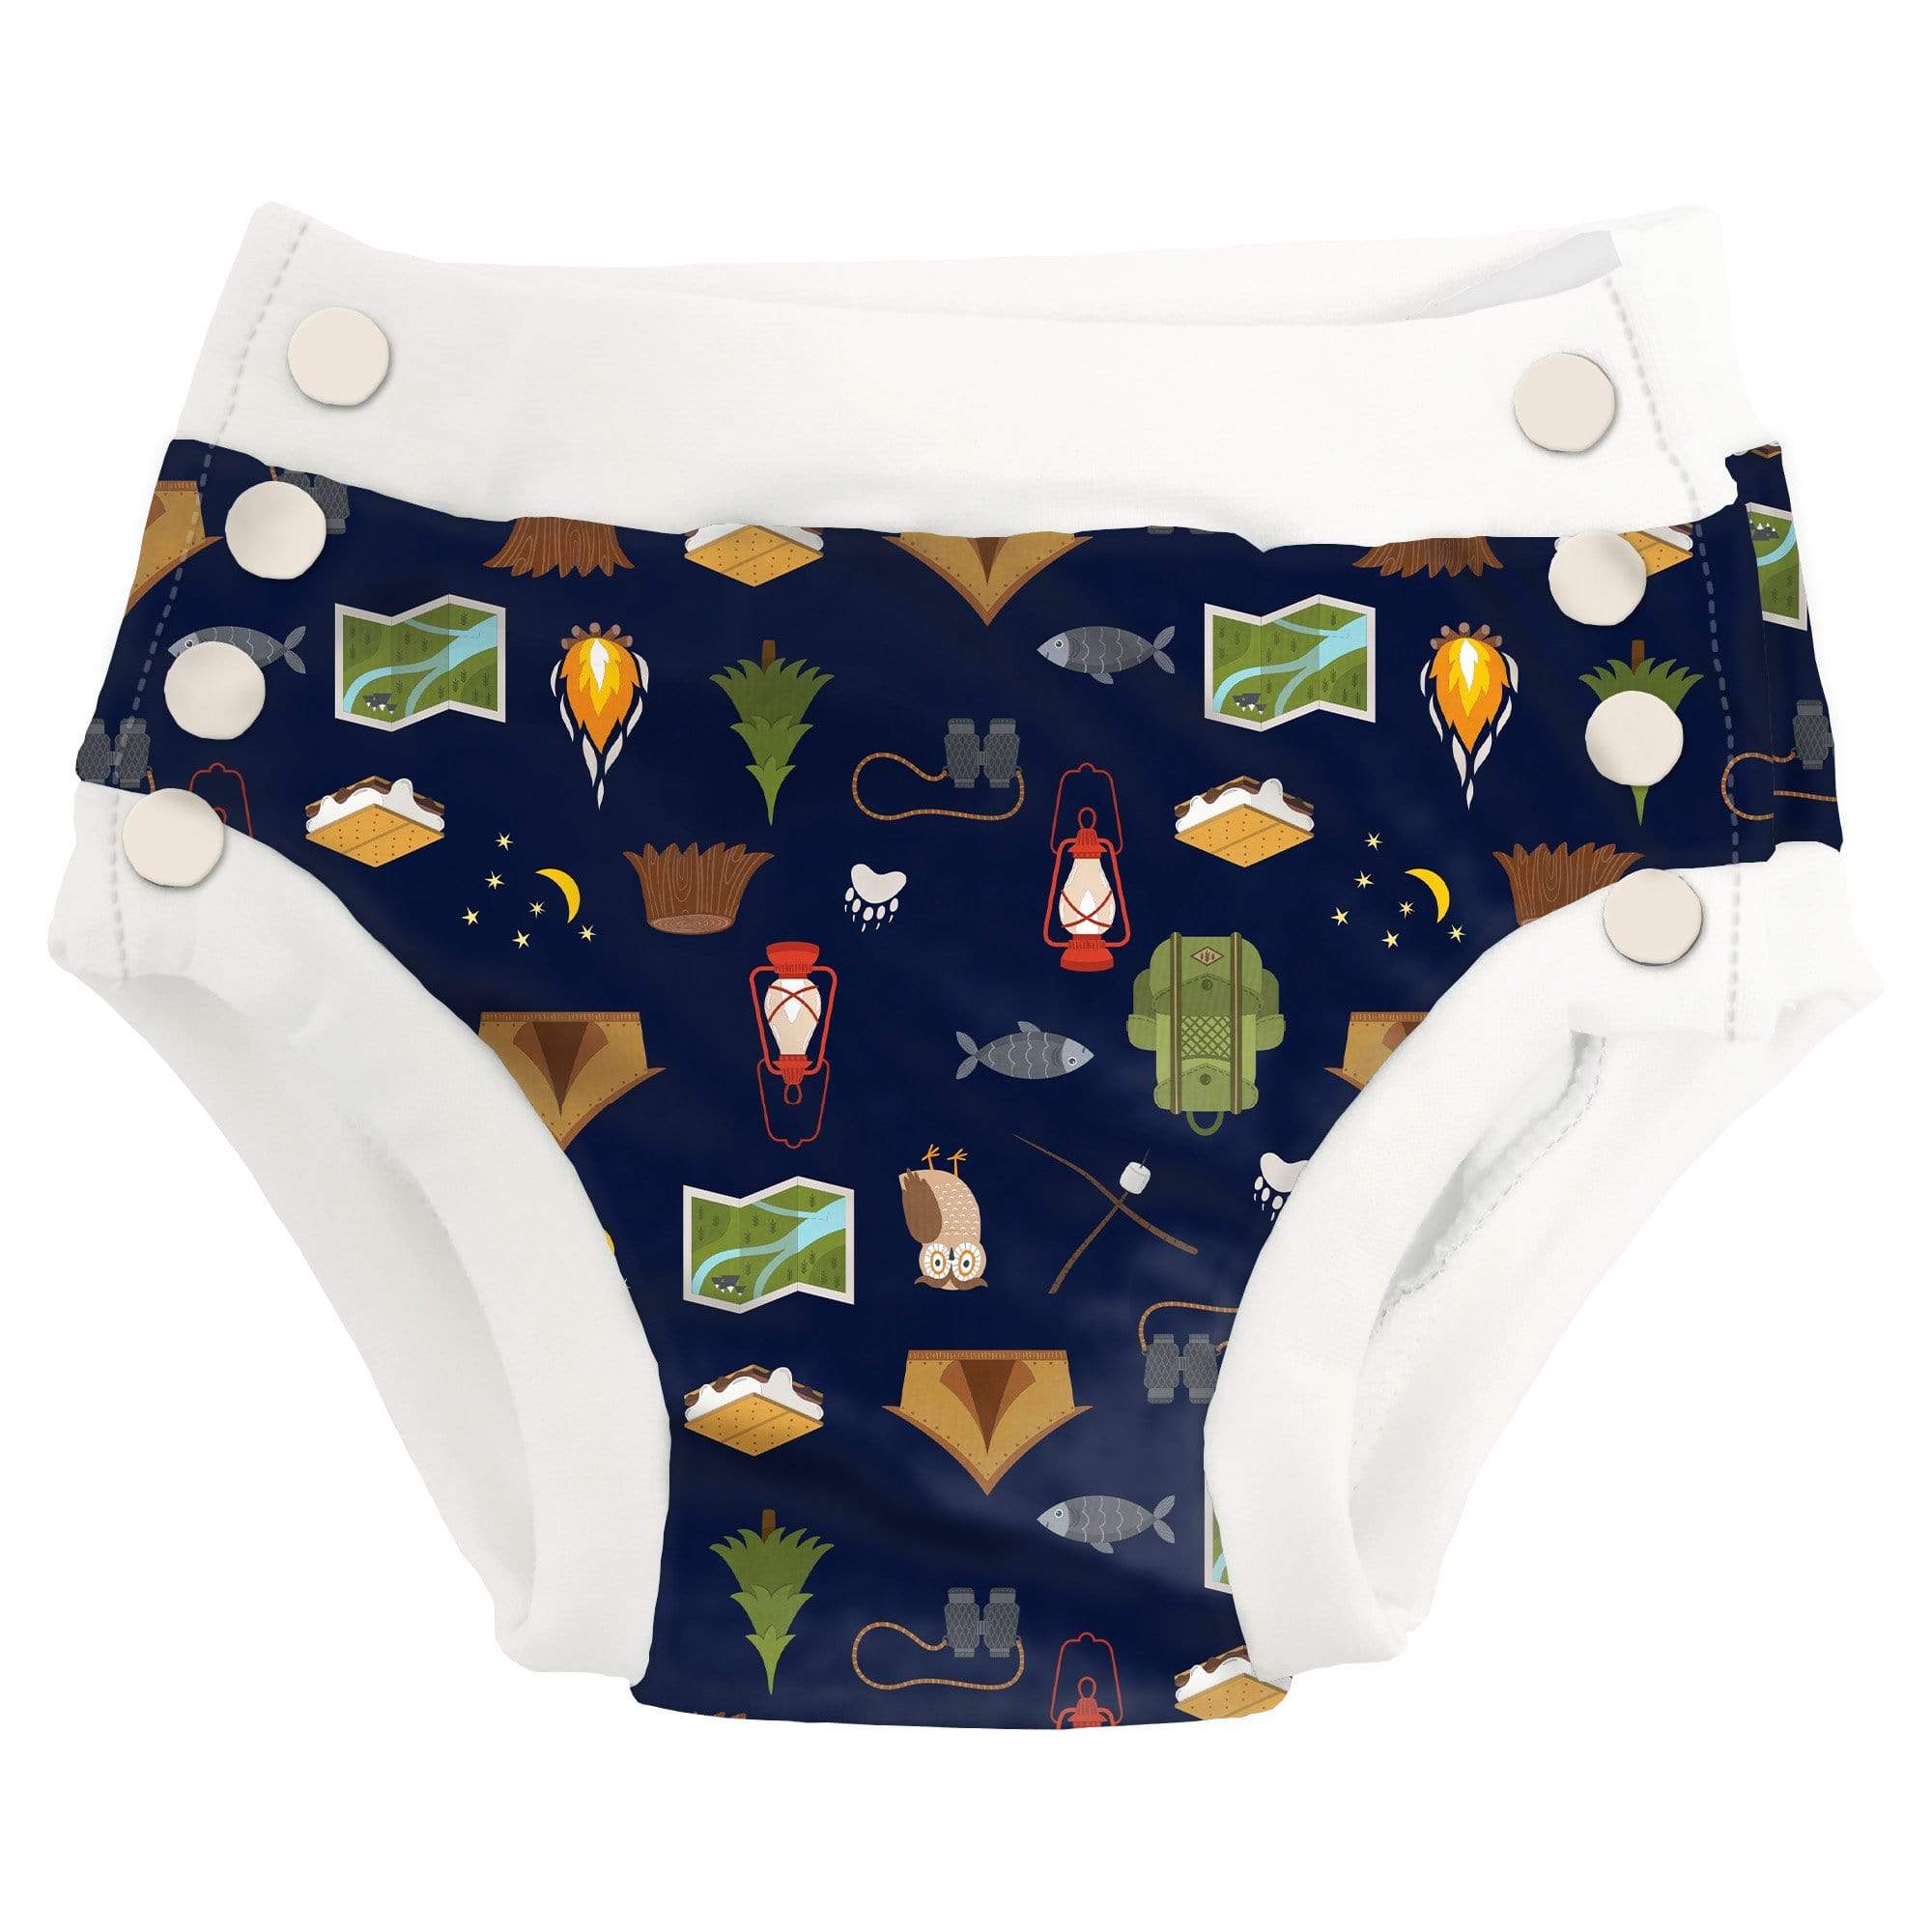 Bambino Mio toilet training pants - Outlet Shop For Kids